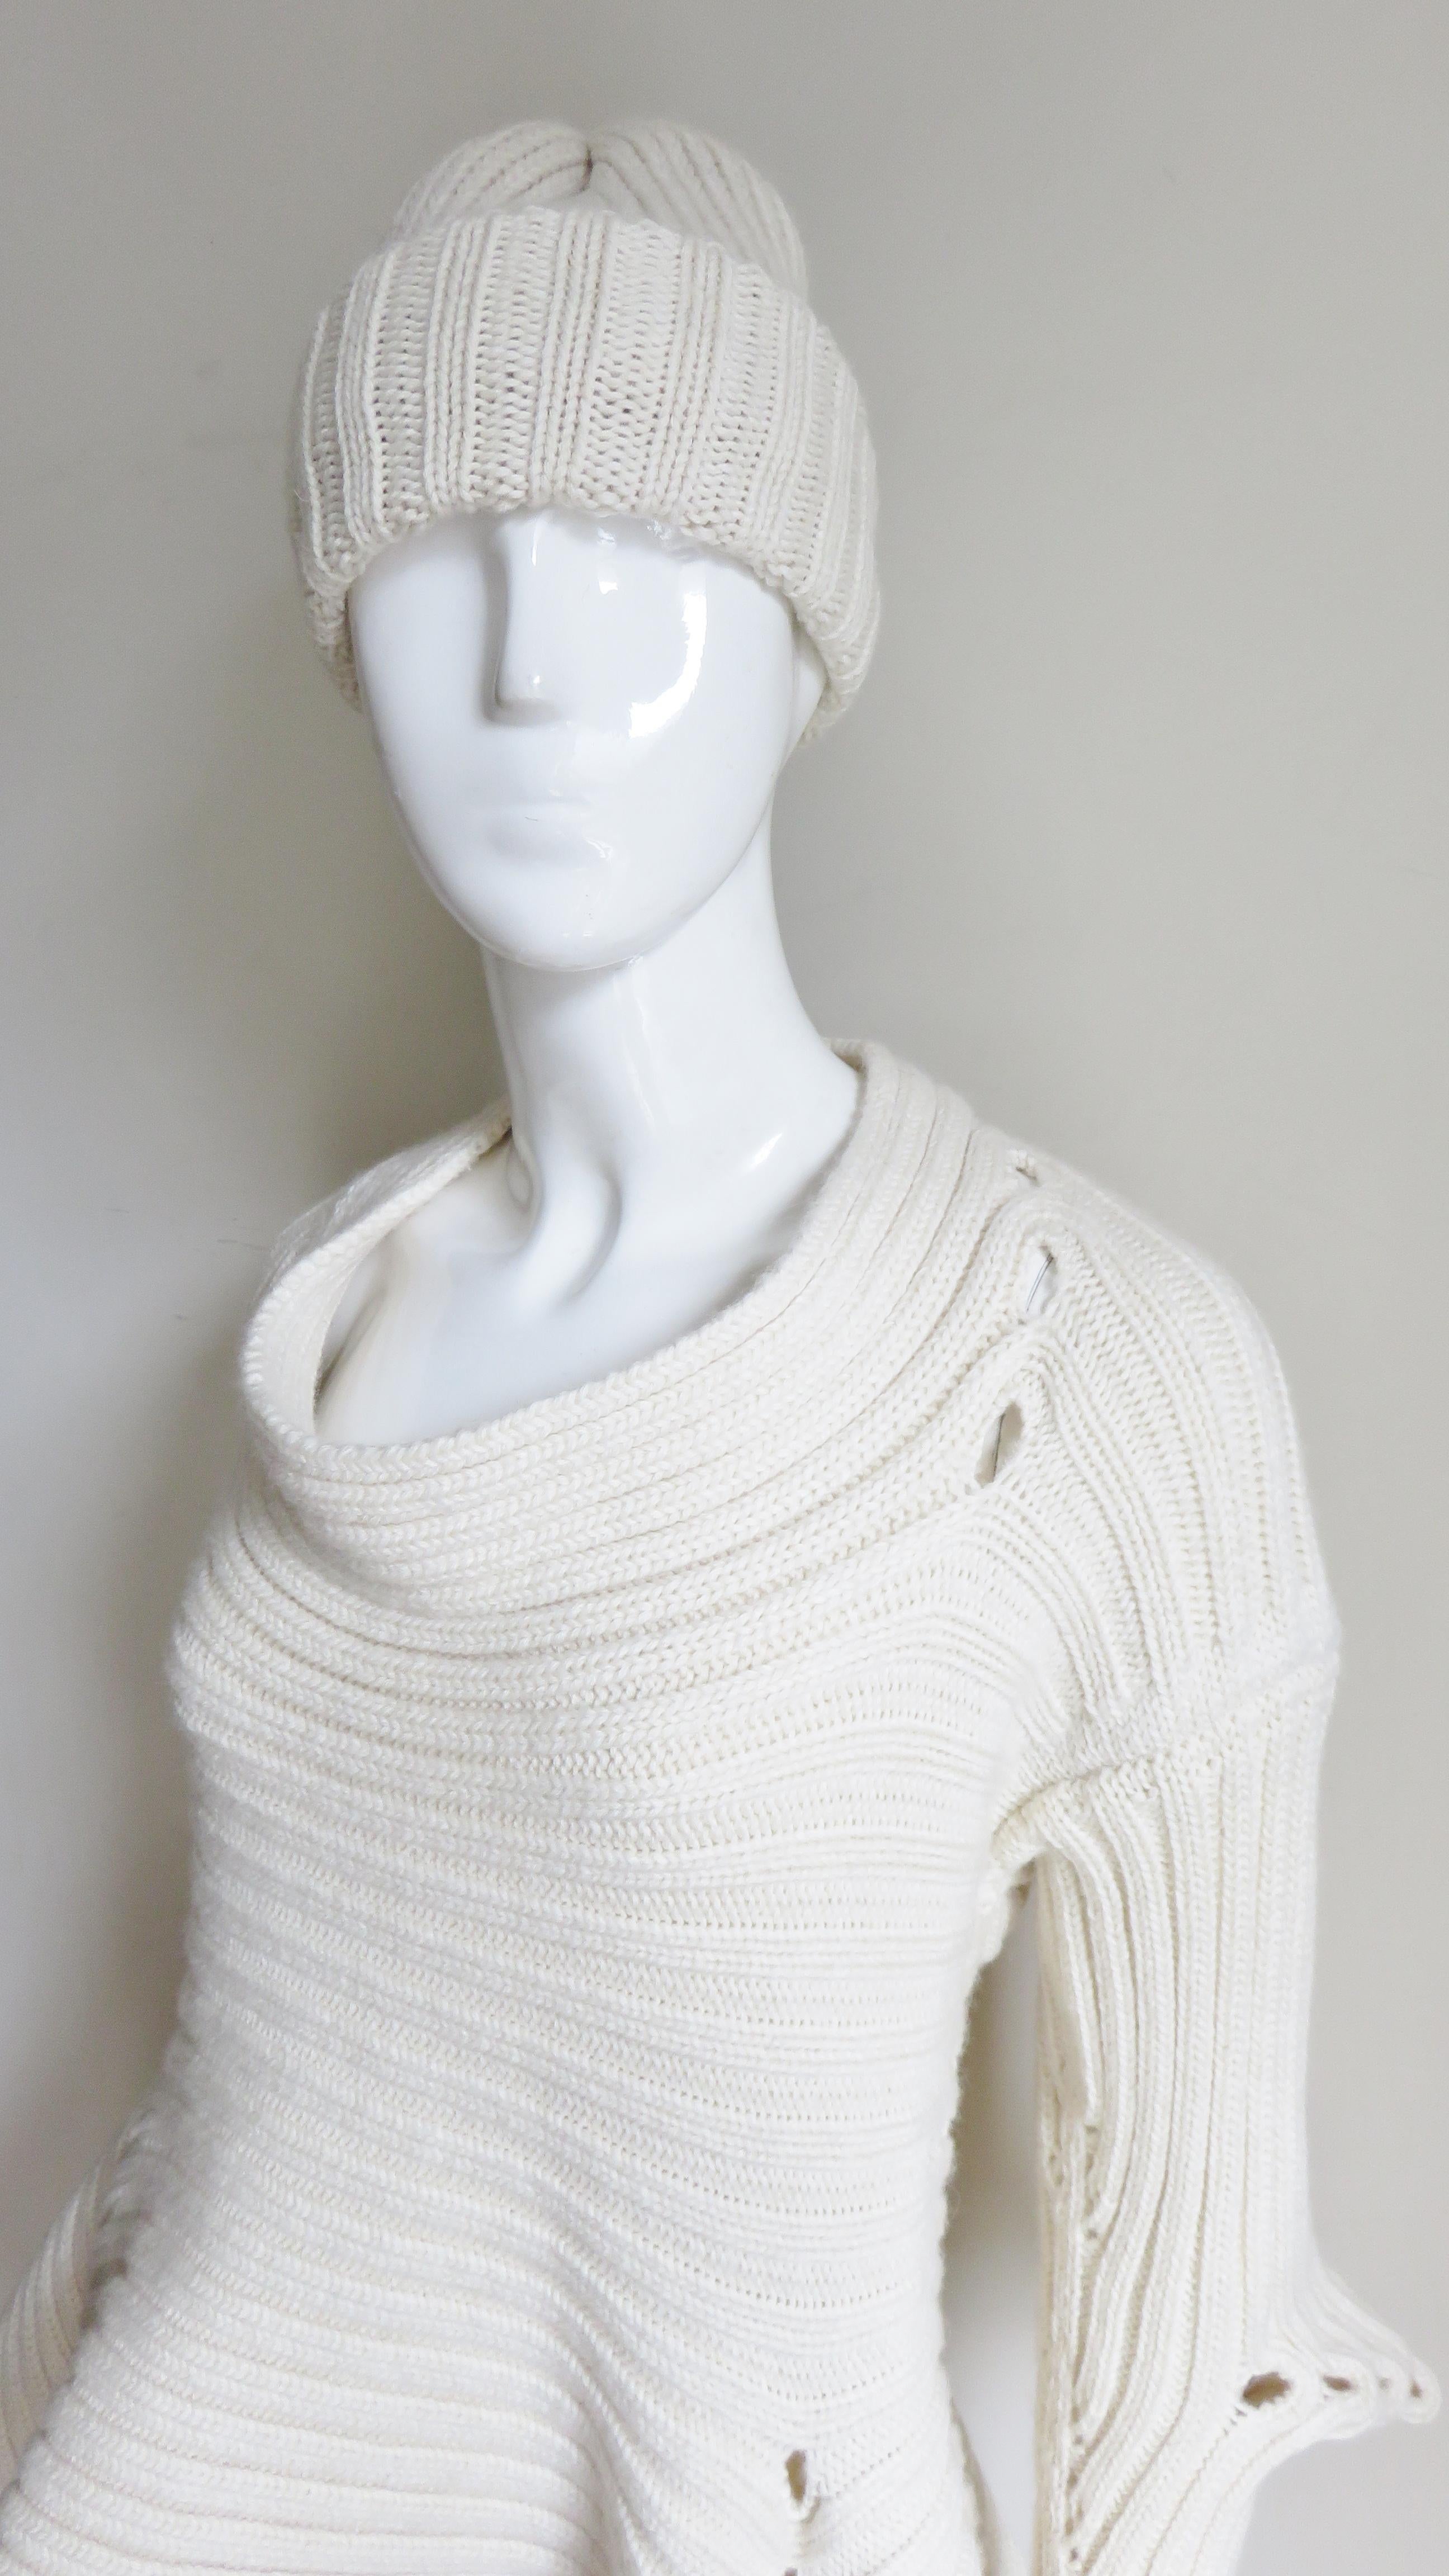 Women's Fintan Mulhollnd New Irish Hand Knit Sweater and Touque